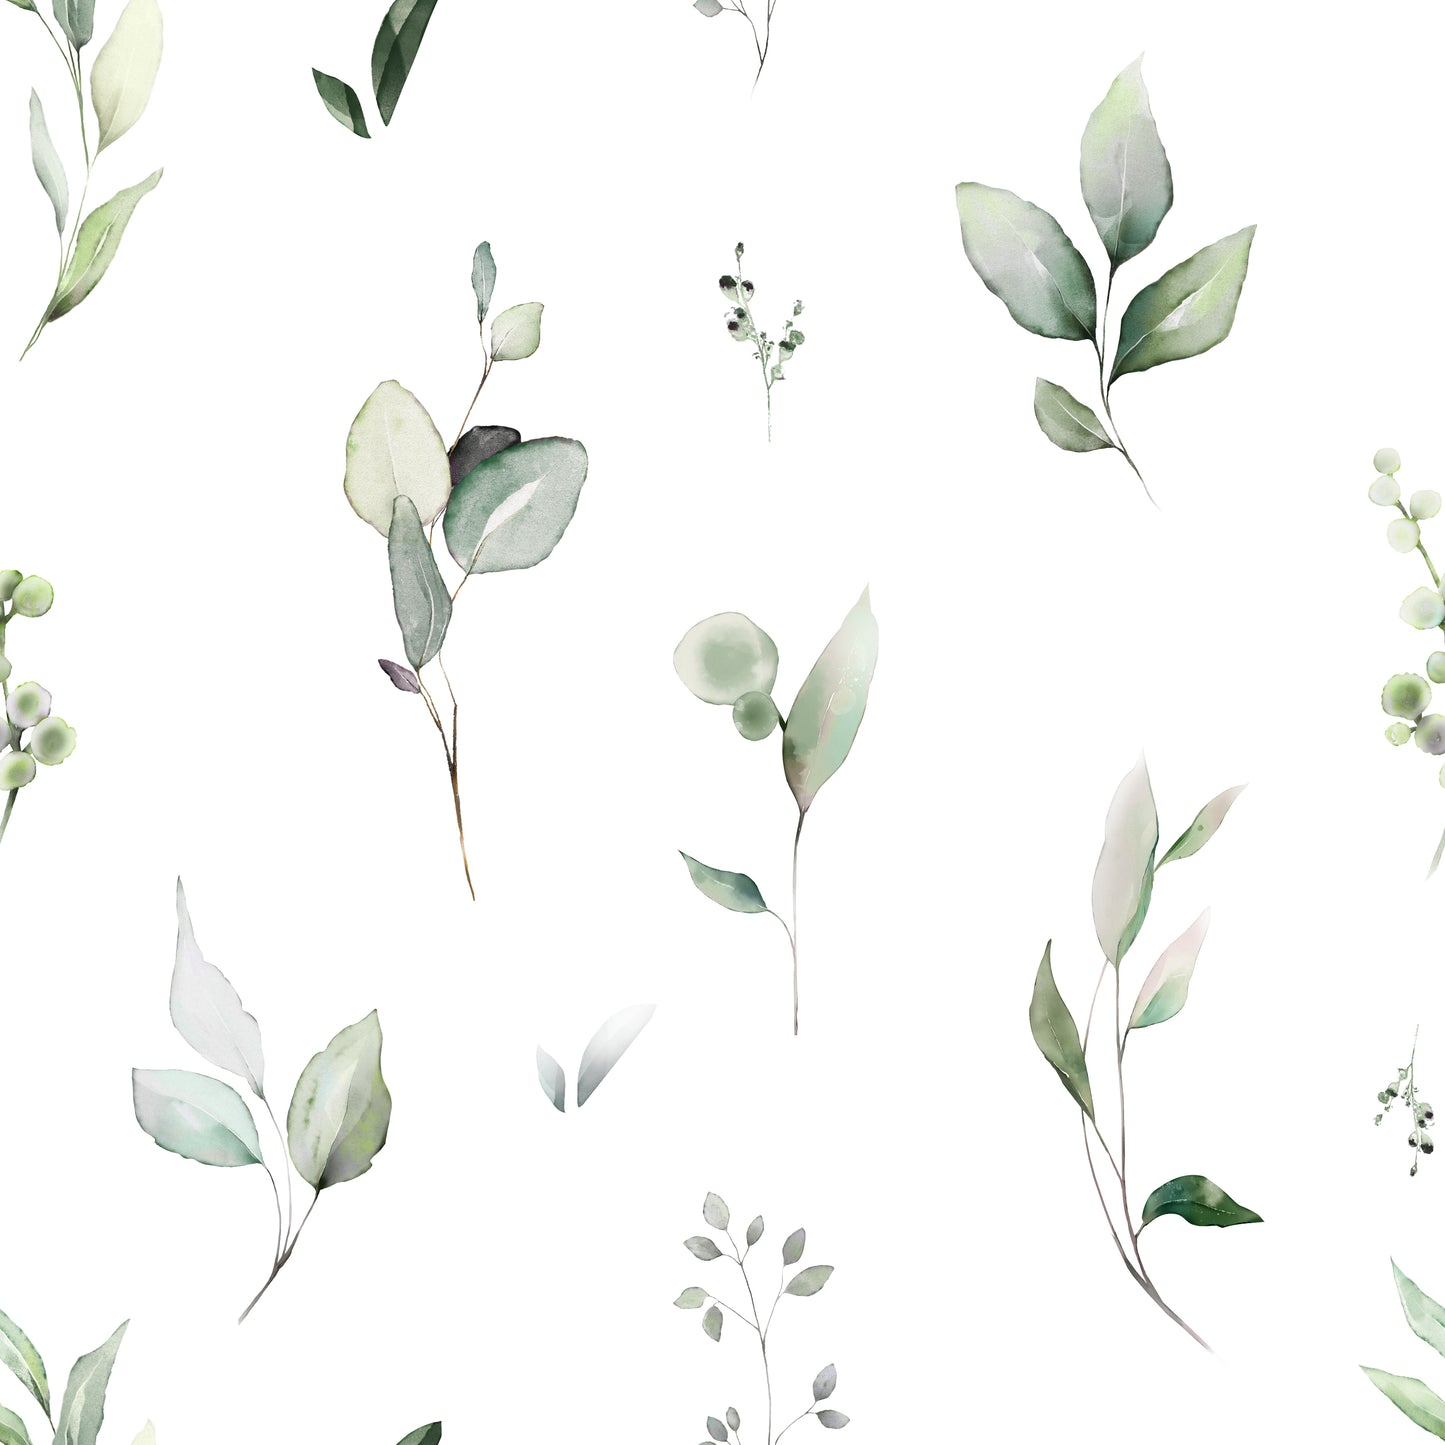 Whimsical green water colour greenery print on white background easy to install and remove peel and stick custom wallpaper available in different lengths/sizes locally created and printed in Canada wallpaper. Washable, durable, commercial grade, removable and waterproof.